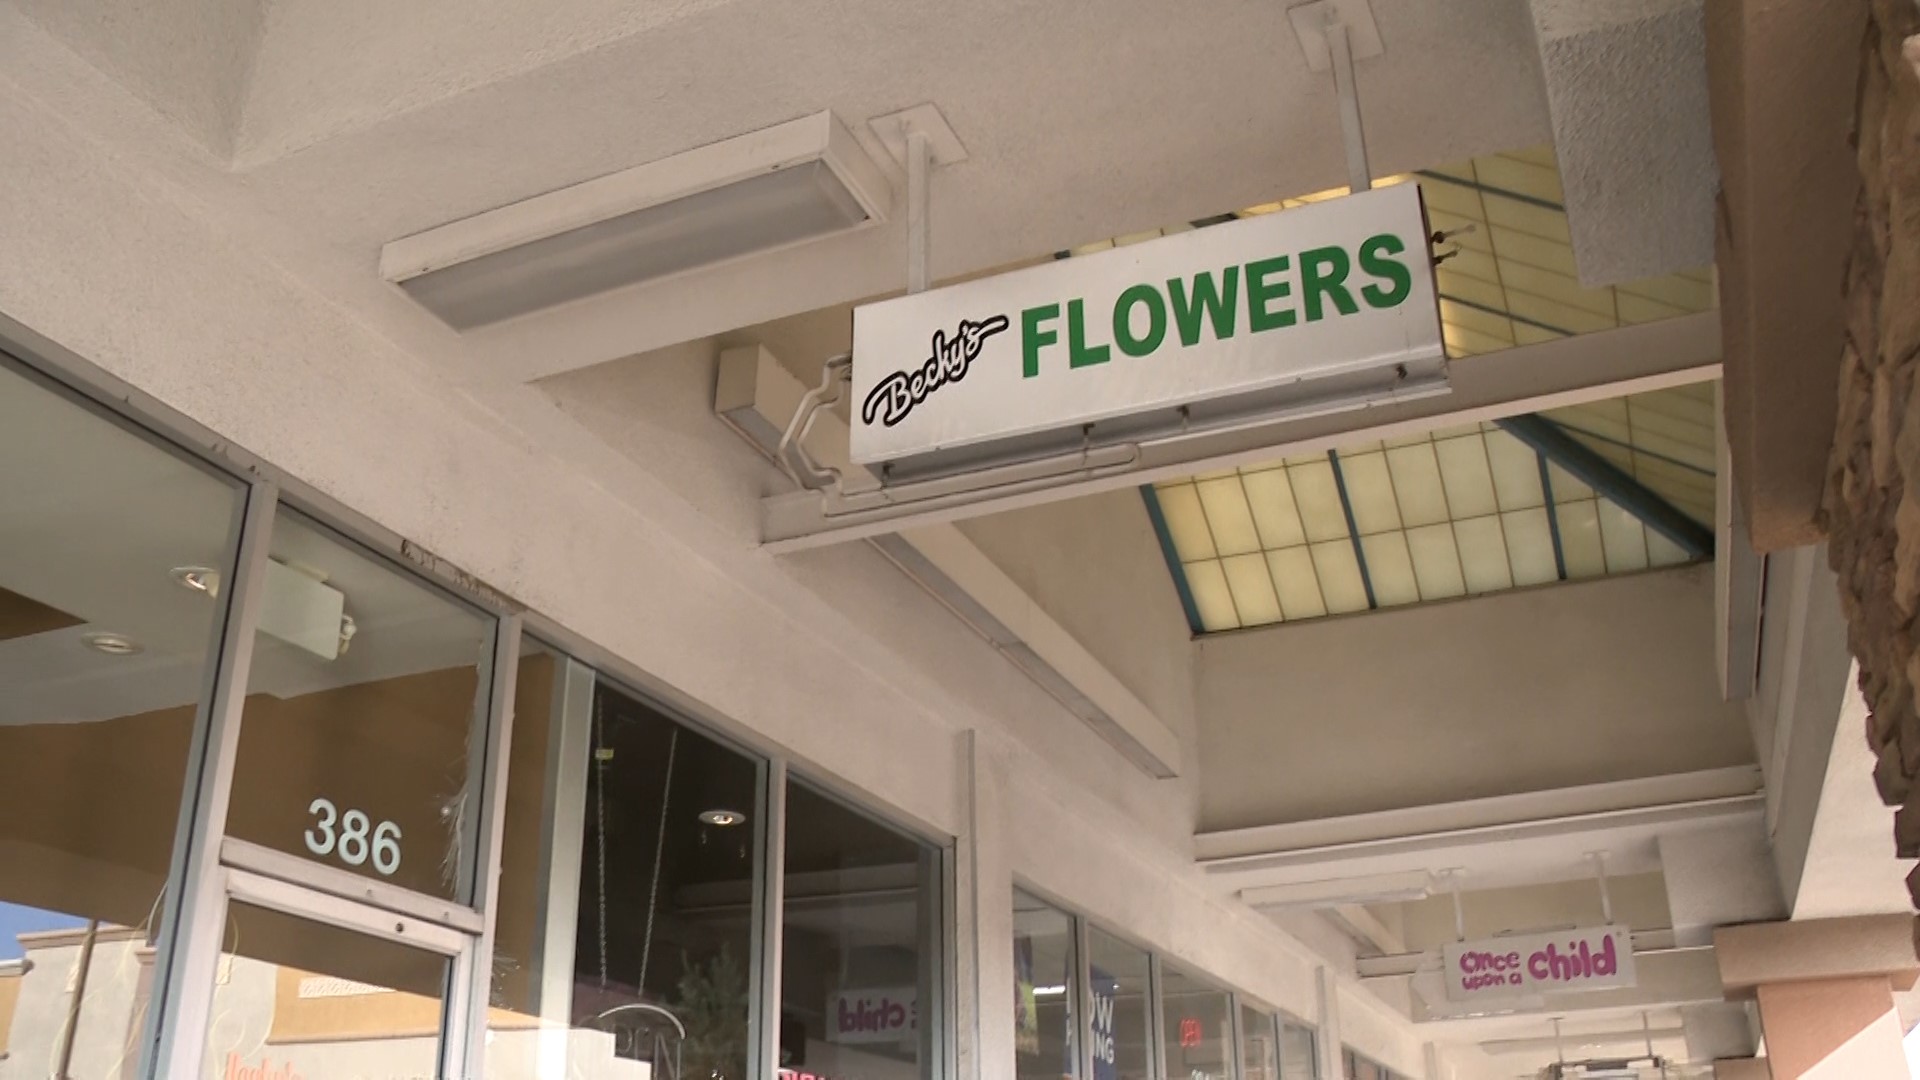 Becky's Flowers has been inundated with calls, comments and negative reviews after people confuse them with a shop in Texas that has the same name.